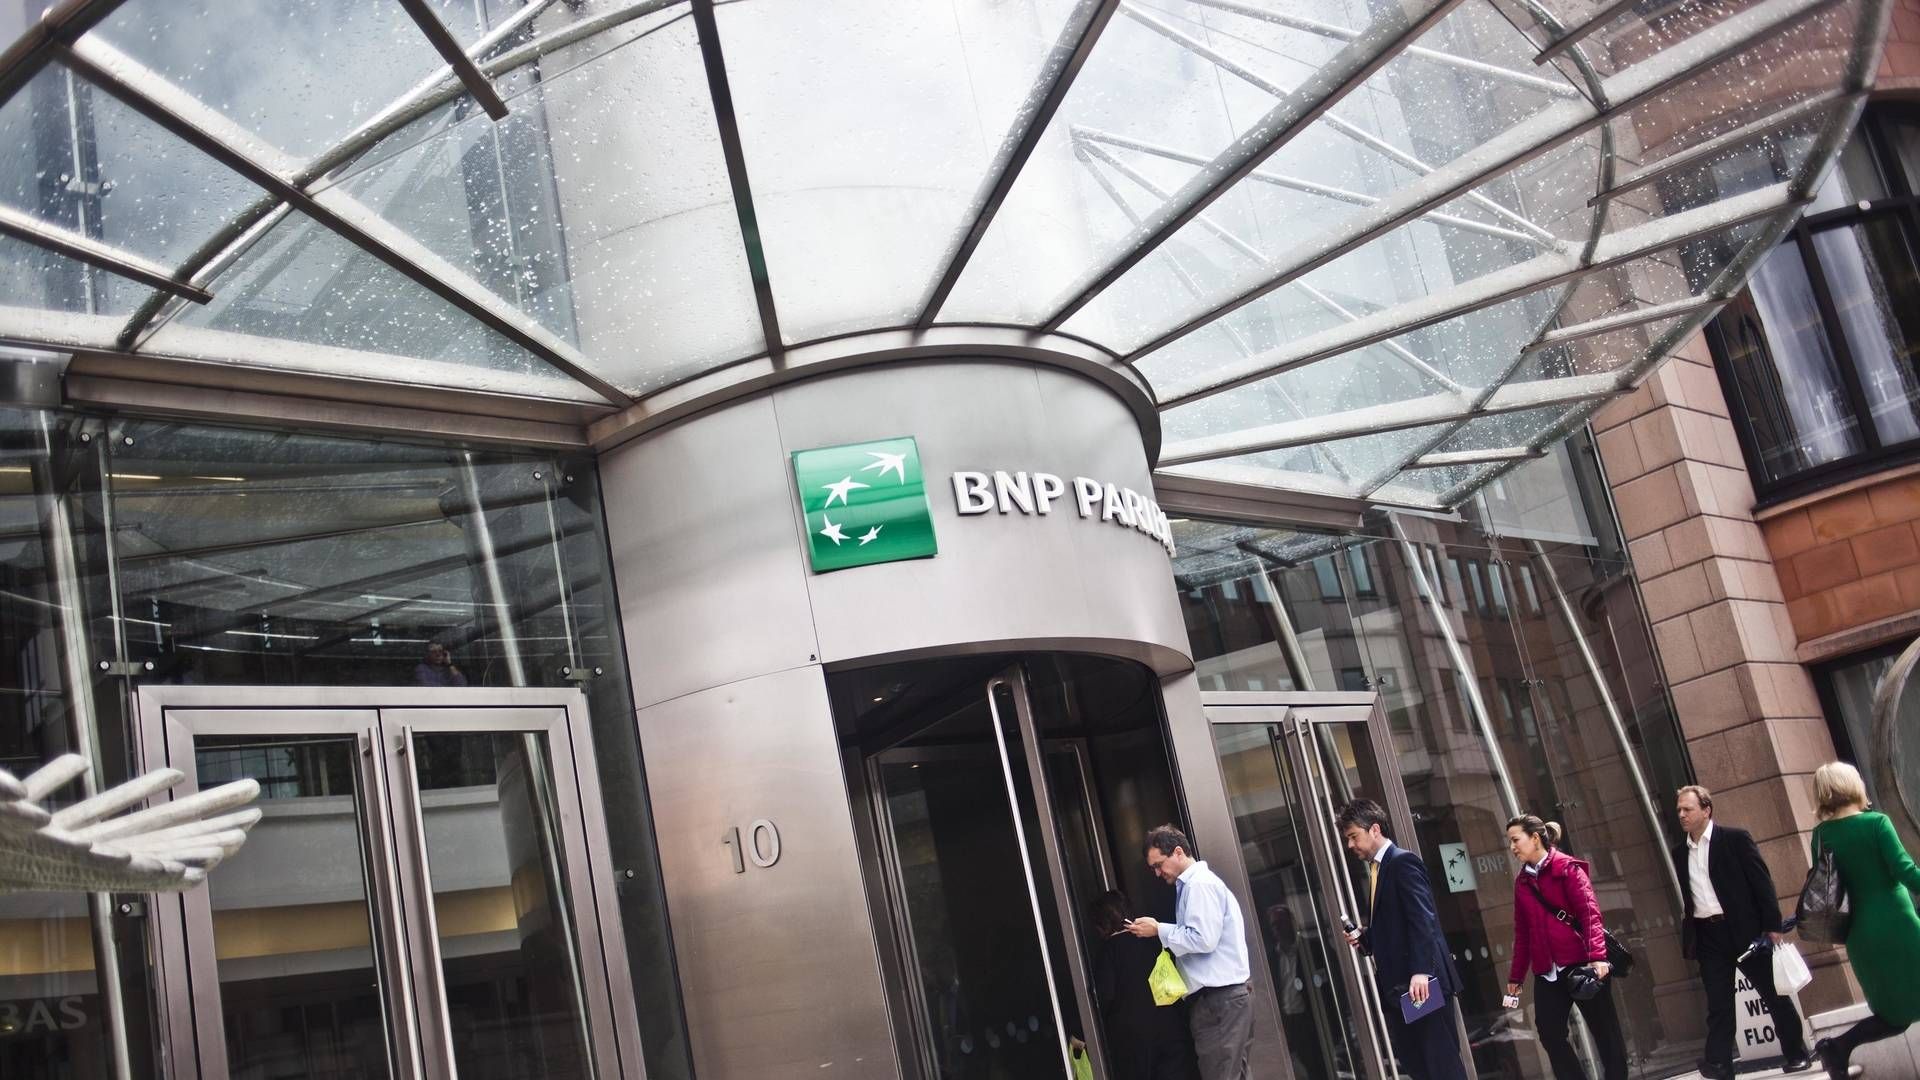 Some borrowers may need to rebuild their cash buffers even as demand for bonds becomes more vulnerable to concerns about the liquidity drain that could come as central banks pare back stimulus, BNP Paribas strategists, including Viktor Hjort and Stephen Caprio, wrote in a note. | Photo: PR/BNP Paribas